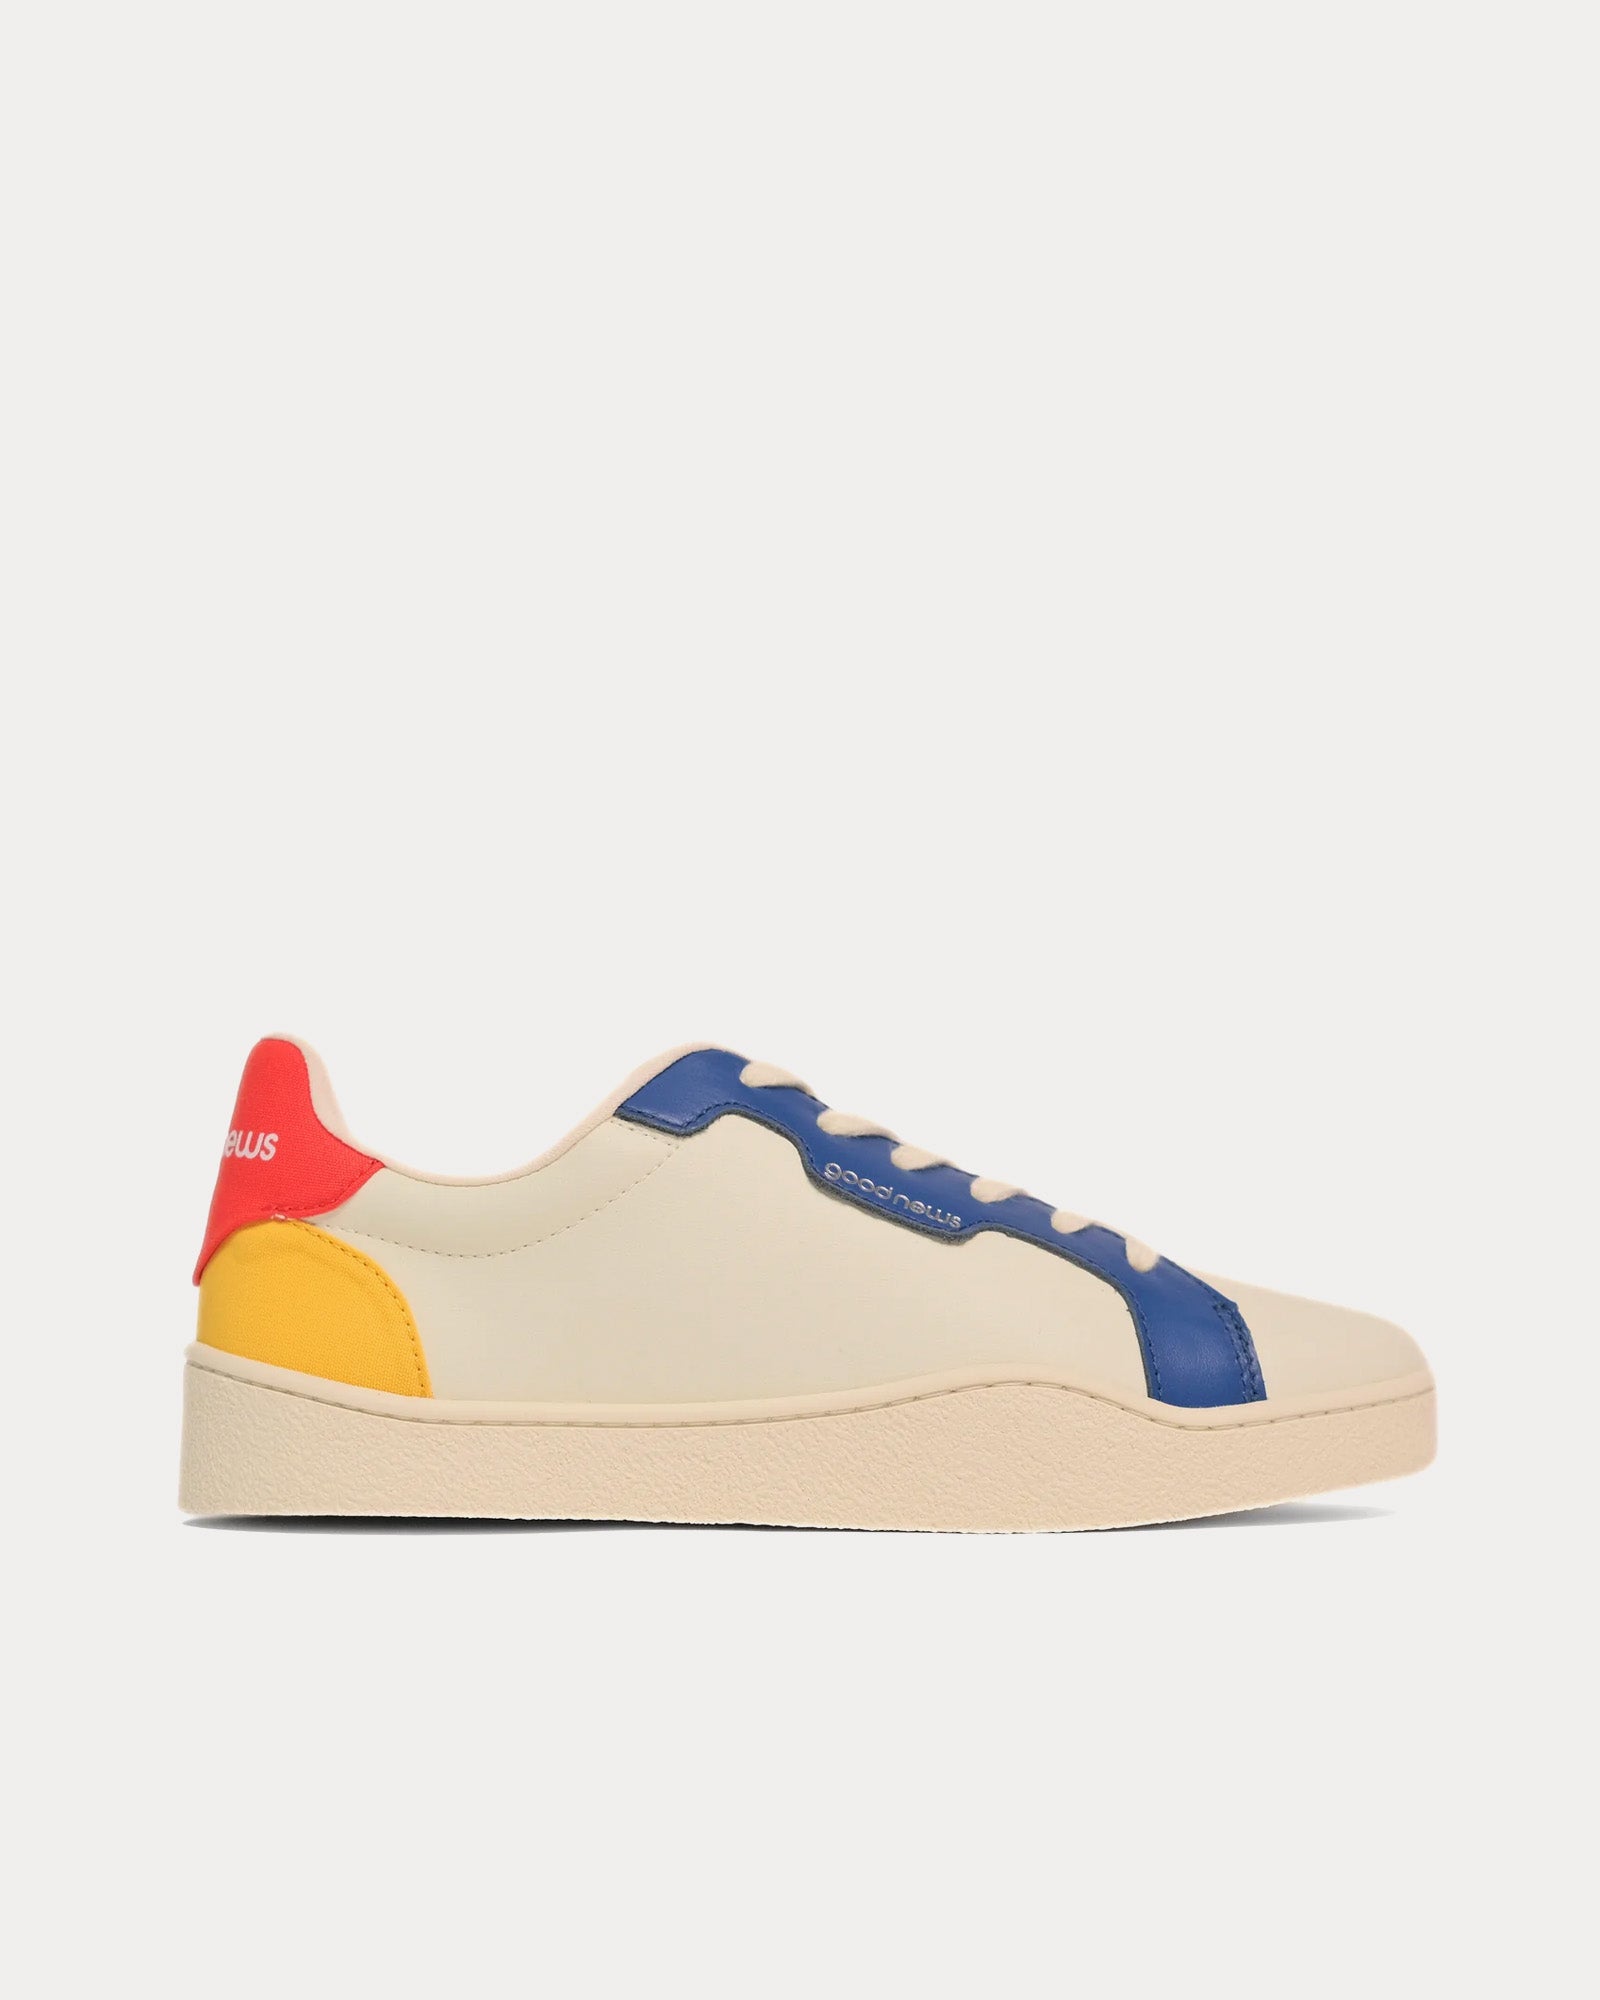 Good News - Venus White / Blue / Red / Yellow Low Top Sneakers